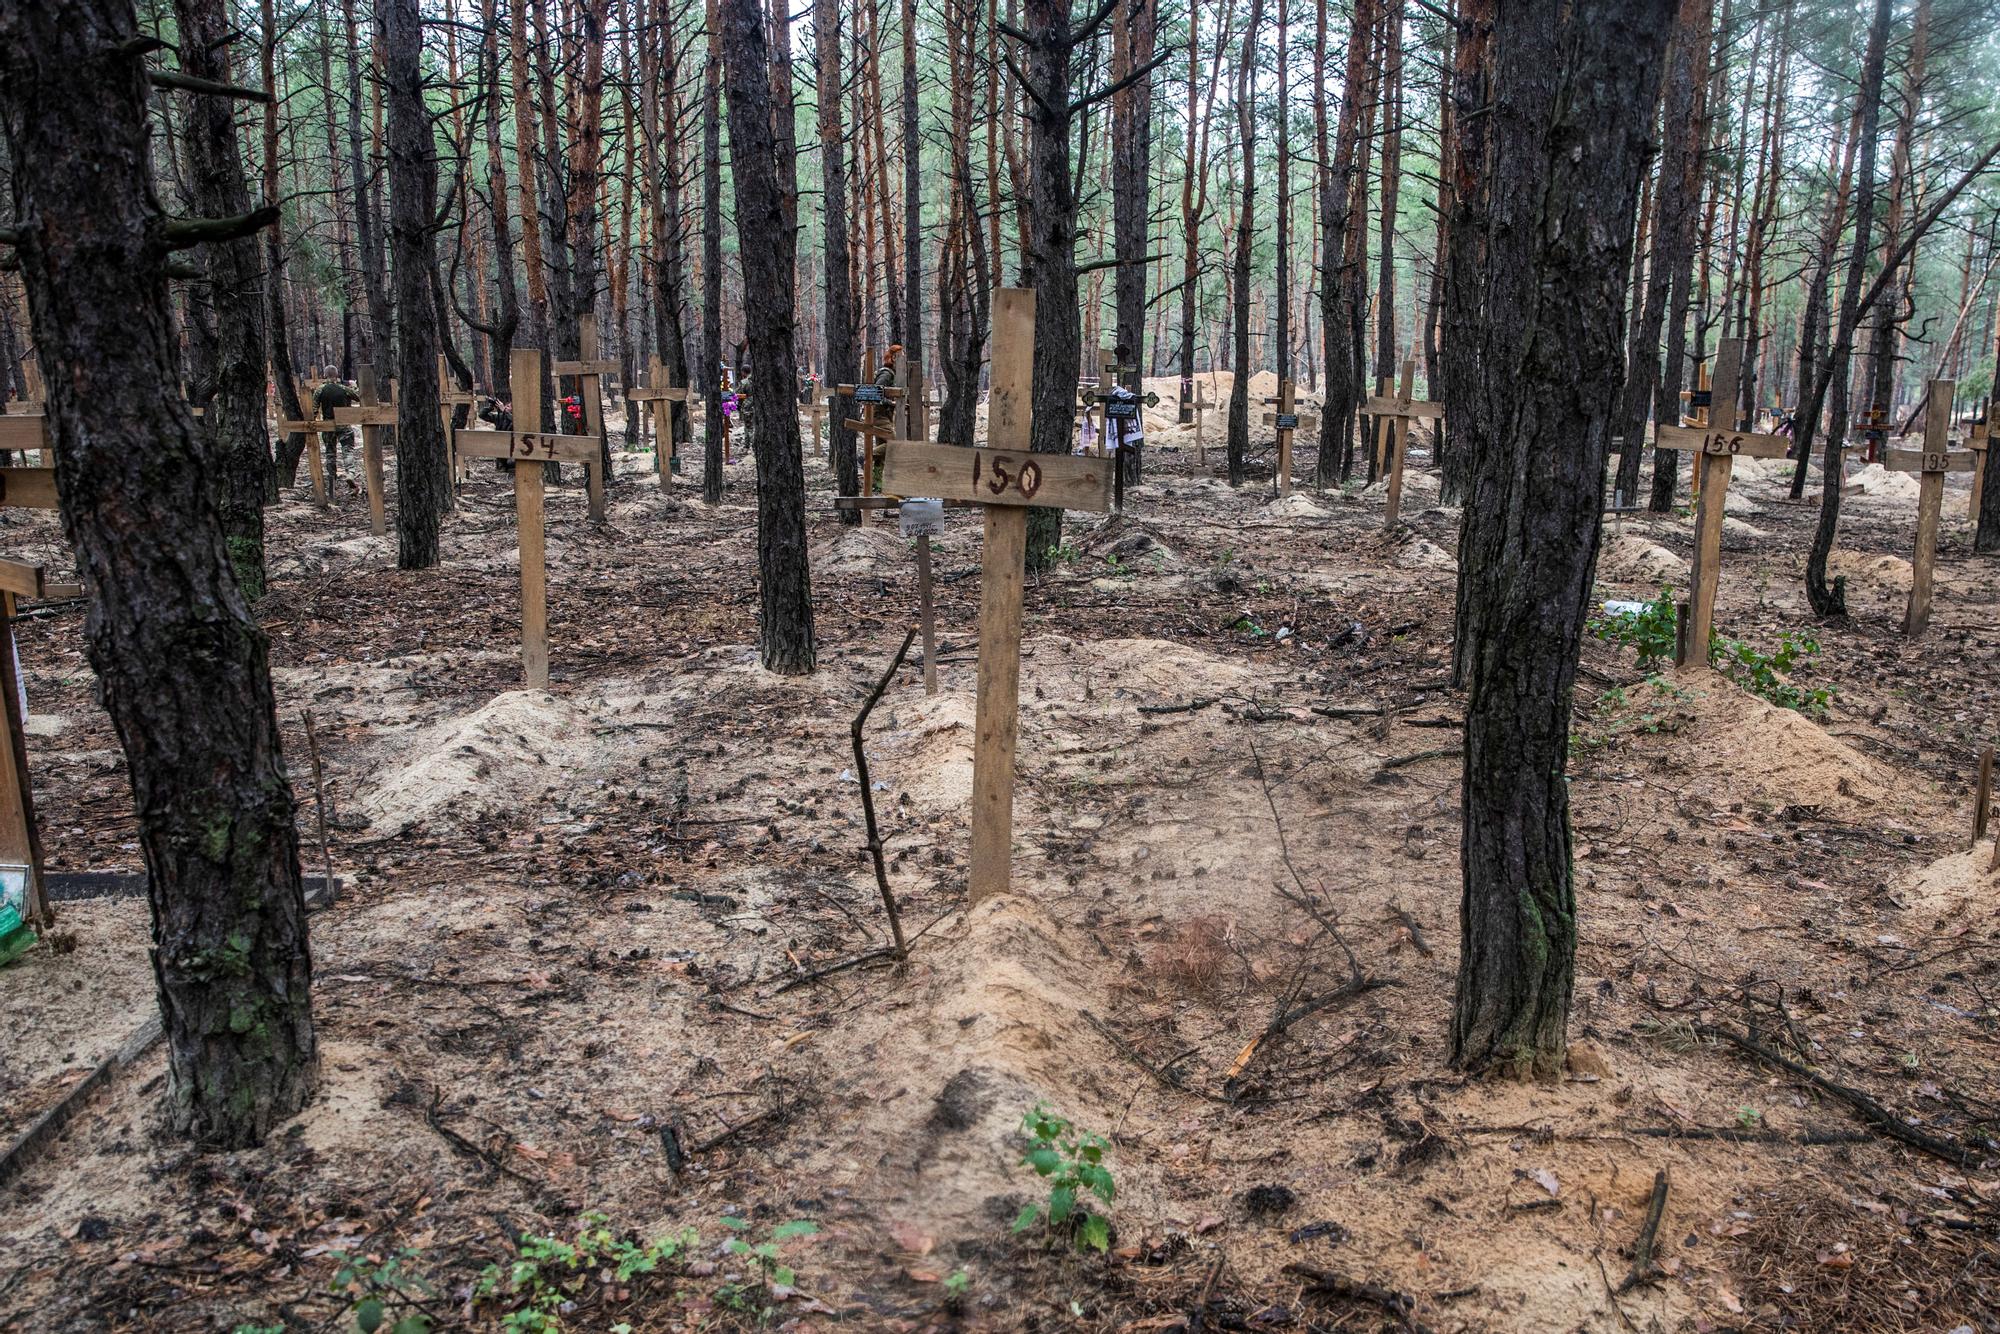 Crosses with numbers are seen at an improvised cemetery of unidentified civilians and Ukrainian soldiers in the town of Izium